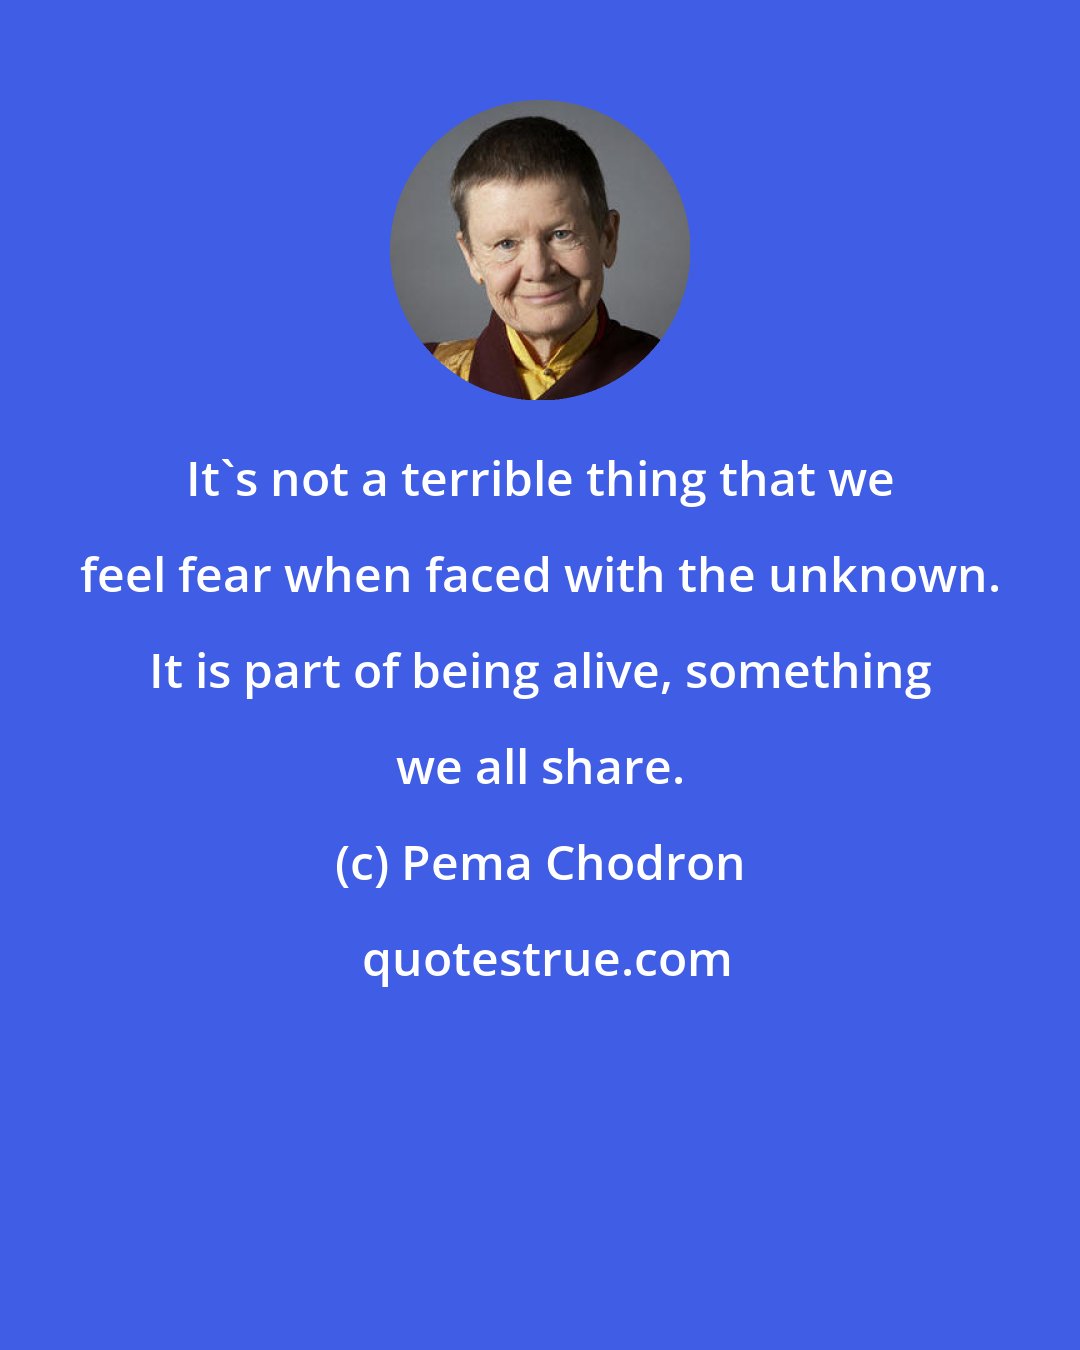 Pema Chodron: It's not a terrible thing that we feel fear when faced with the unknown. It is part of being alive, something we all share.